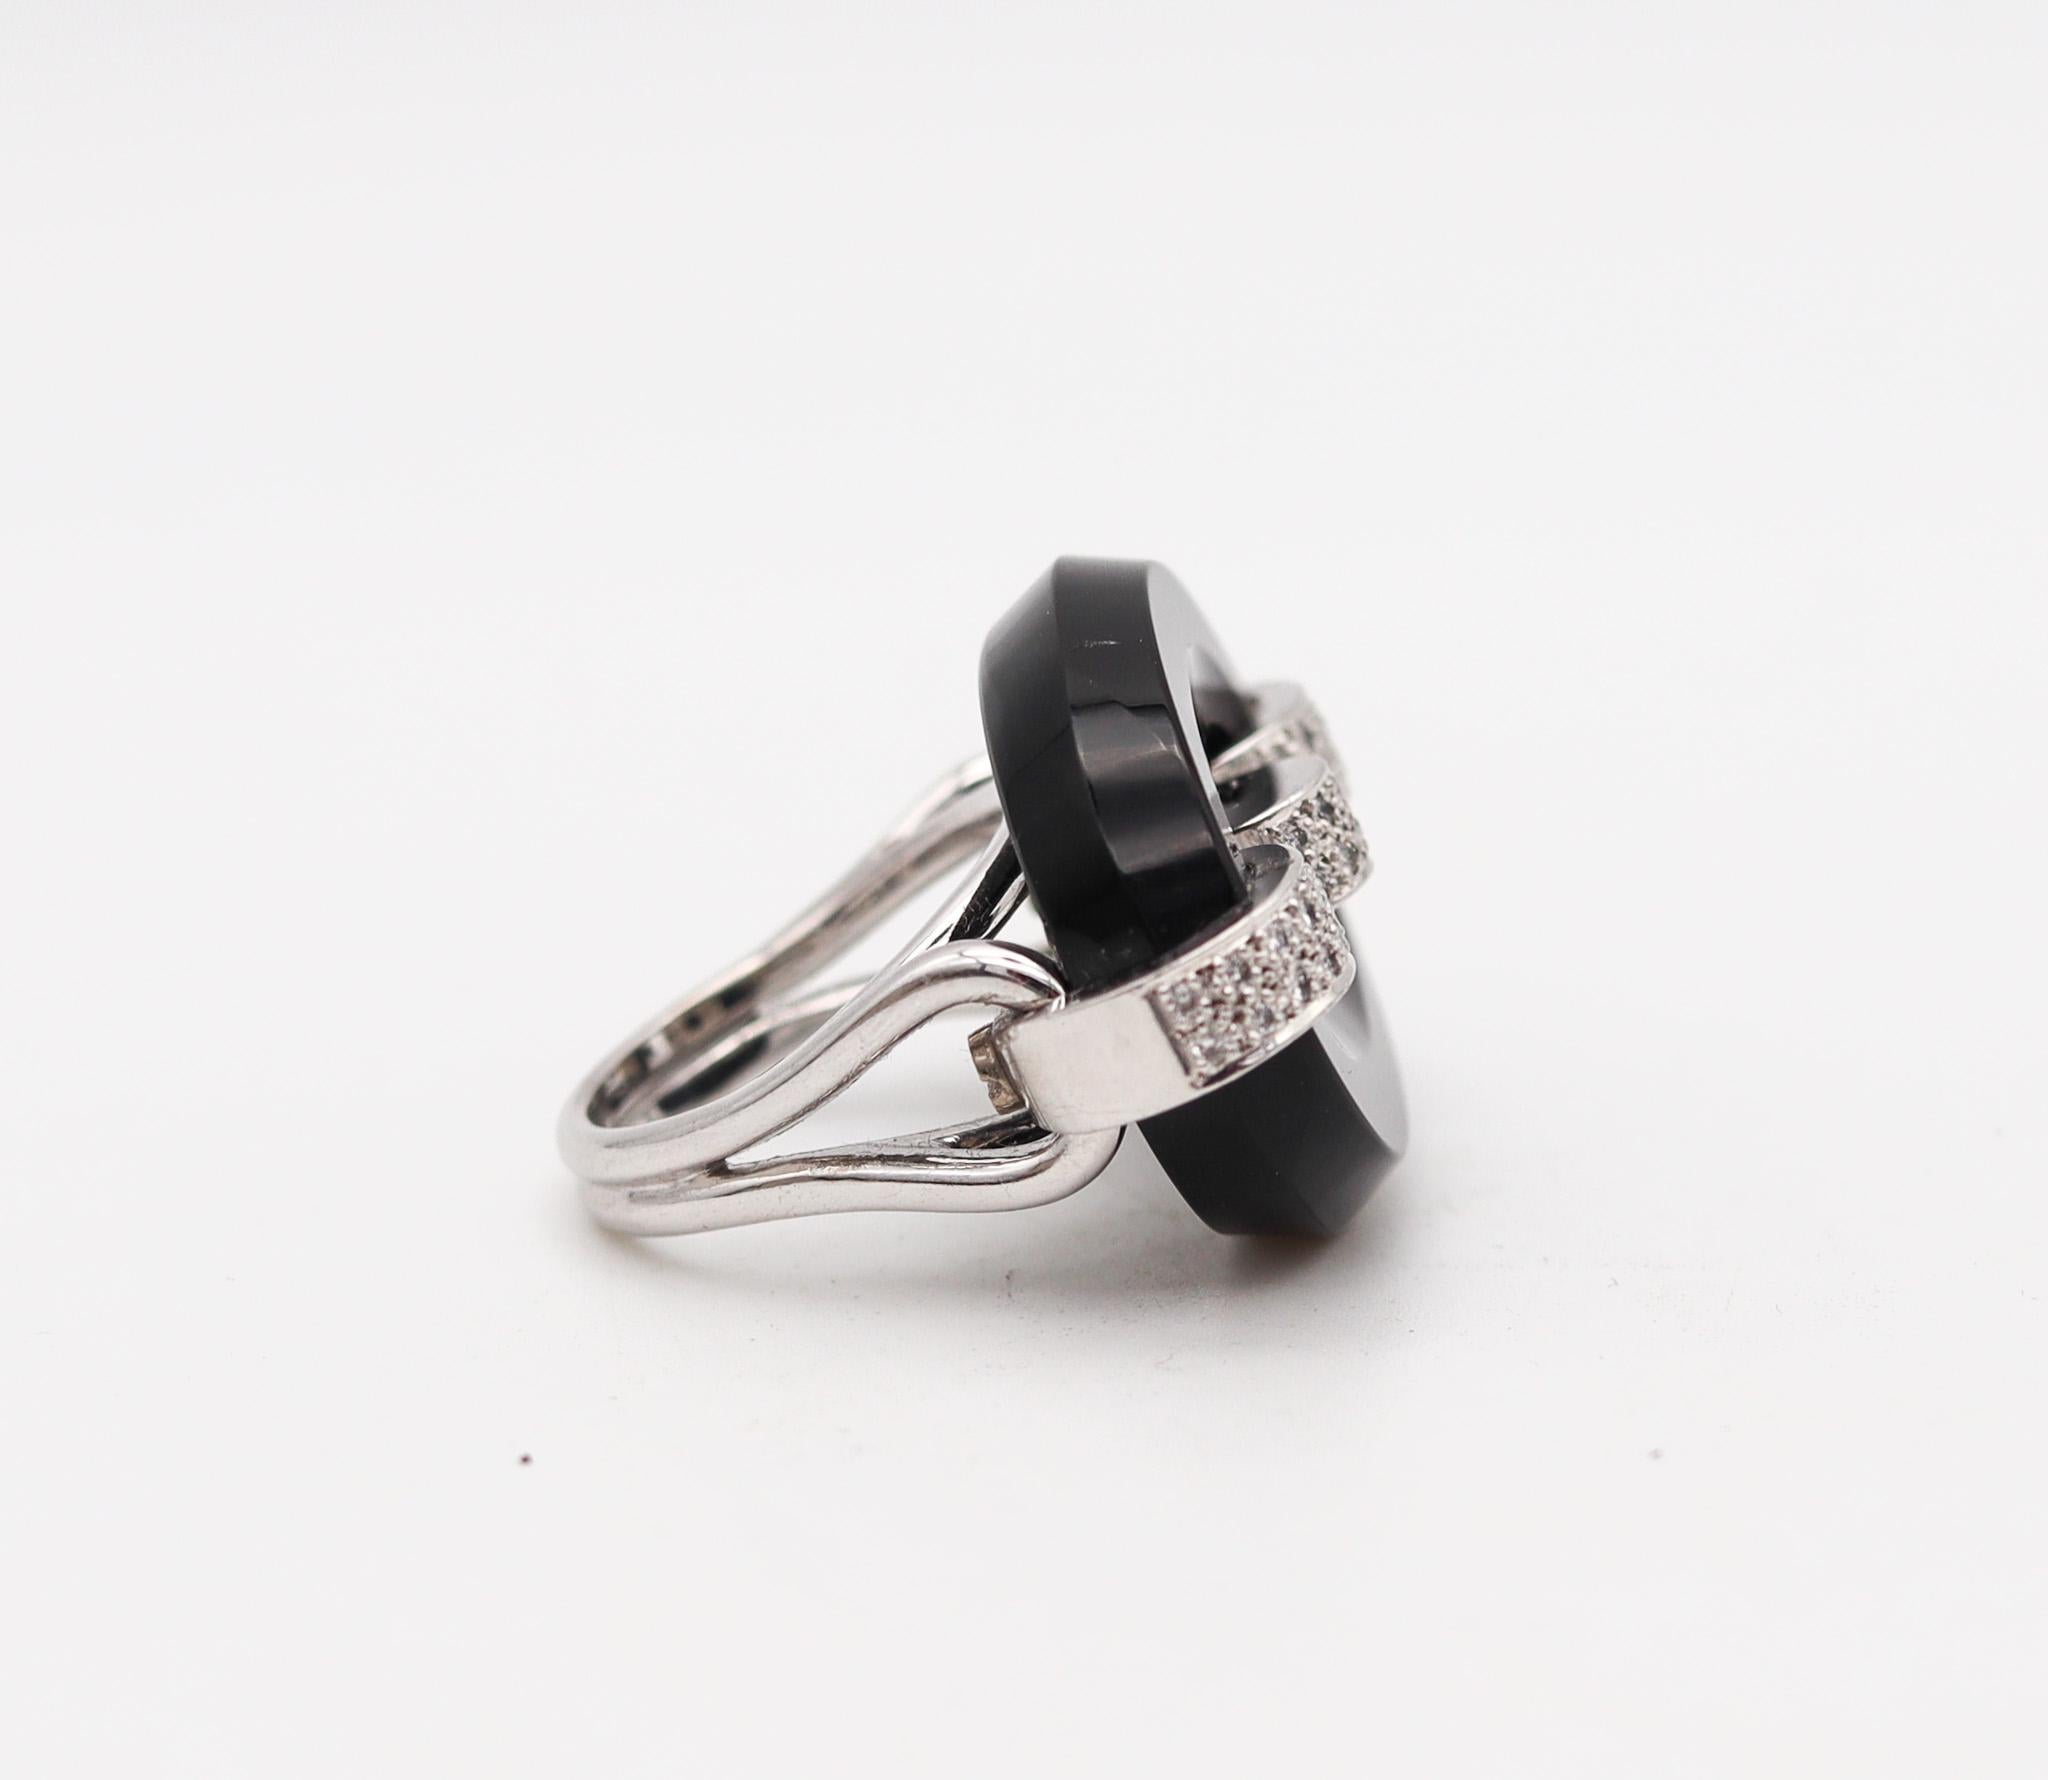 Brilliant Cut Midcentury 1950 Mariner Link Cocktail Ring in 18kt Gold with Diamonds and Onyx